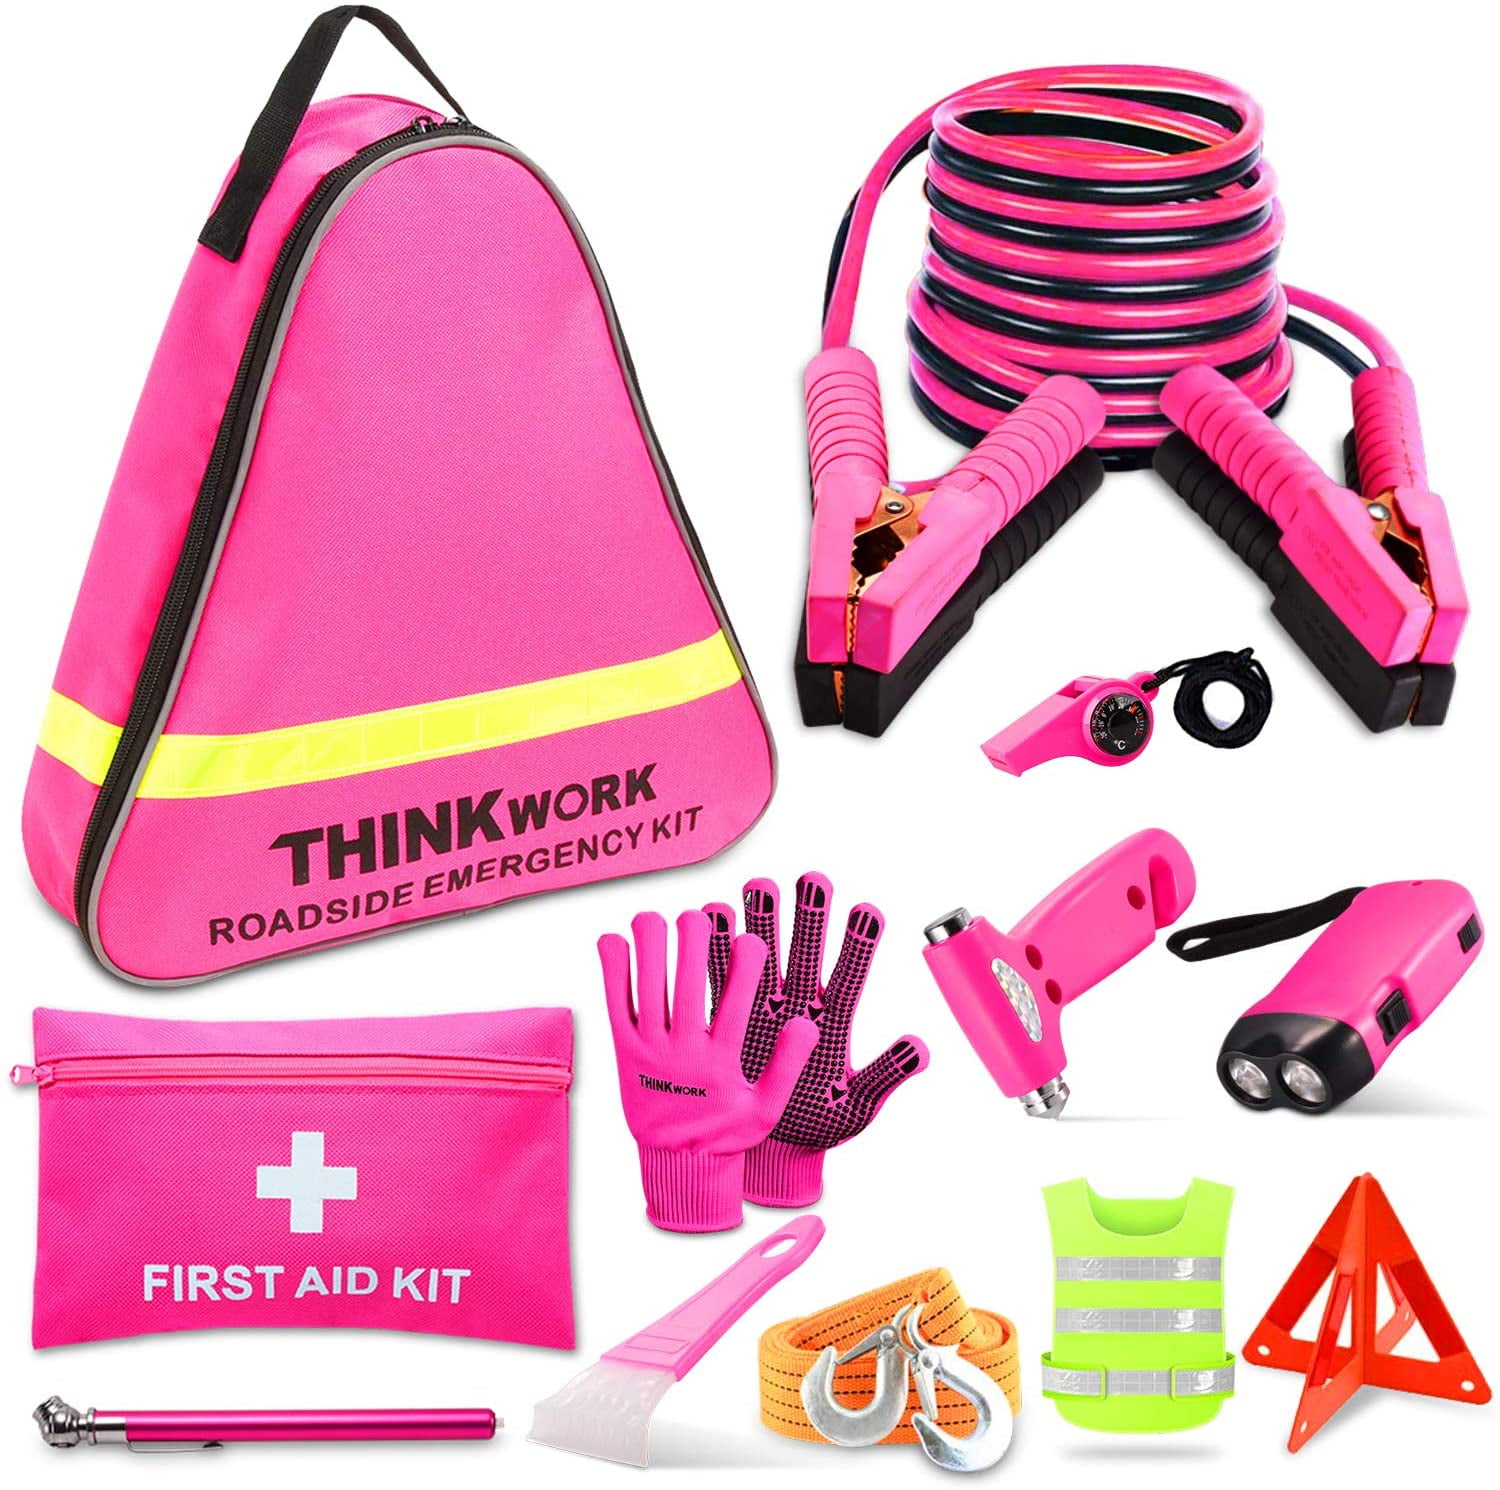 Gears Out Pretty Pink Roadside Kit - Pink Emergency Kit for Teen Girls and Women - Car Accessories for Women - Durable Carry Bag with Pink Jumper